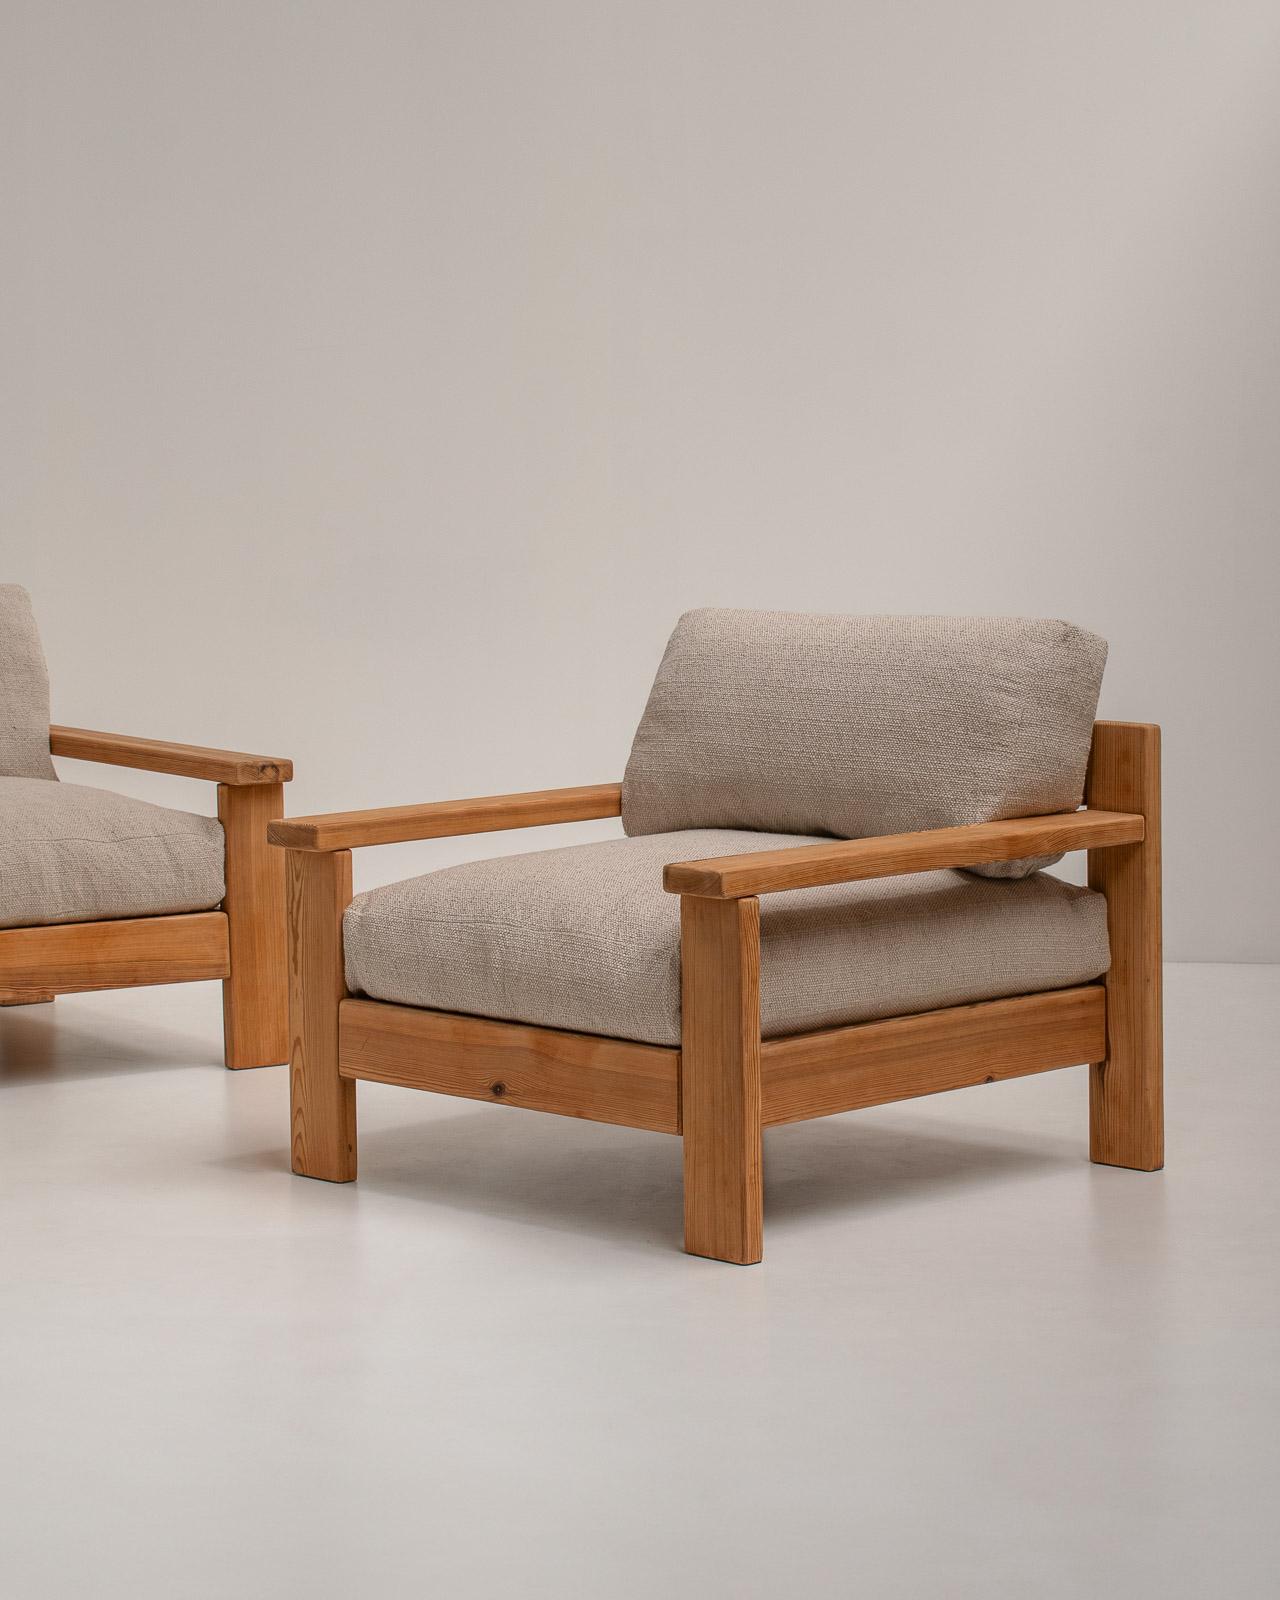 Italian Minimalistic Mid-century Modern Lounge Chairs in Natural Wood, Italy, 1970s For Sale